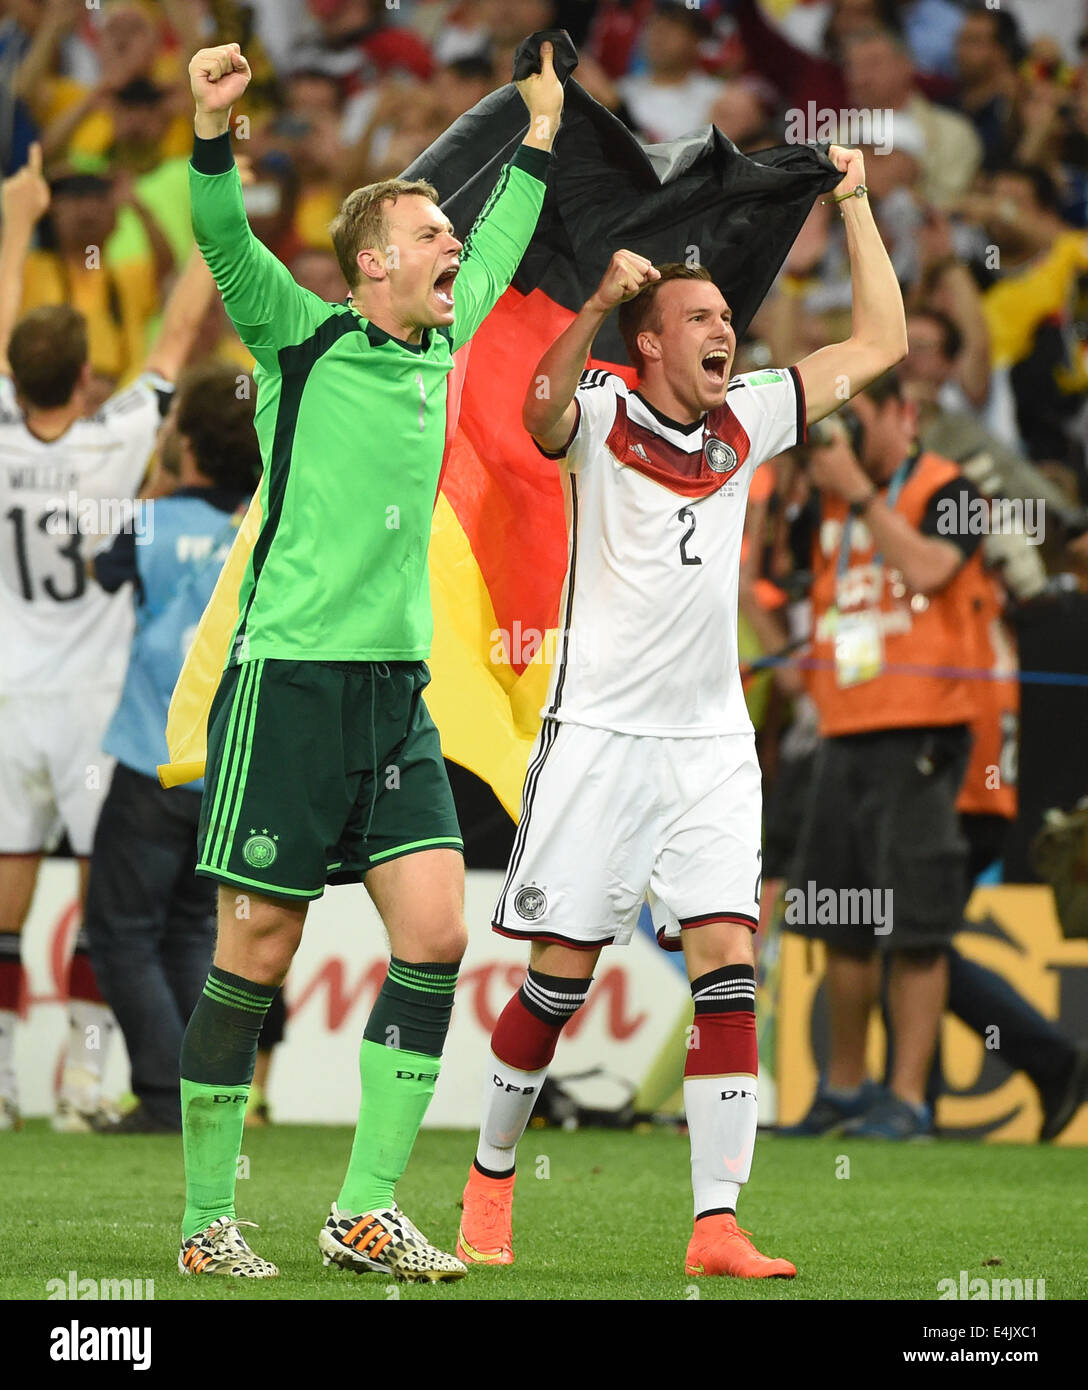 Rio De Janeiro, Brazil. 13th July, 2014. Germany's Kevin Grosskreutz (R) and goalkeeper Manuel Neuer celebrate their victory after the final match between Germany and Argentina of 2014 FIFA World Cup at the Estadio do Maracana Stadium in Rio de Janeiro, Brazil, on July 13, 2014. Germany won 1-0 over Argentina after 120 minutes and took its fourth World Cup title on Sunday. Credit:  Liu Dawei/Xinhua/Alamy Live News Stock Photo